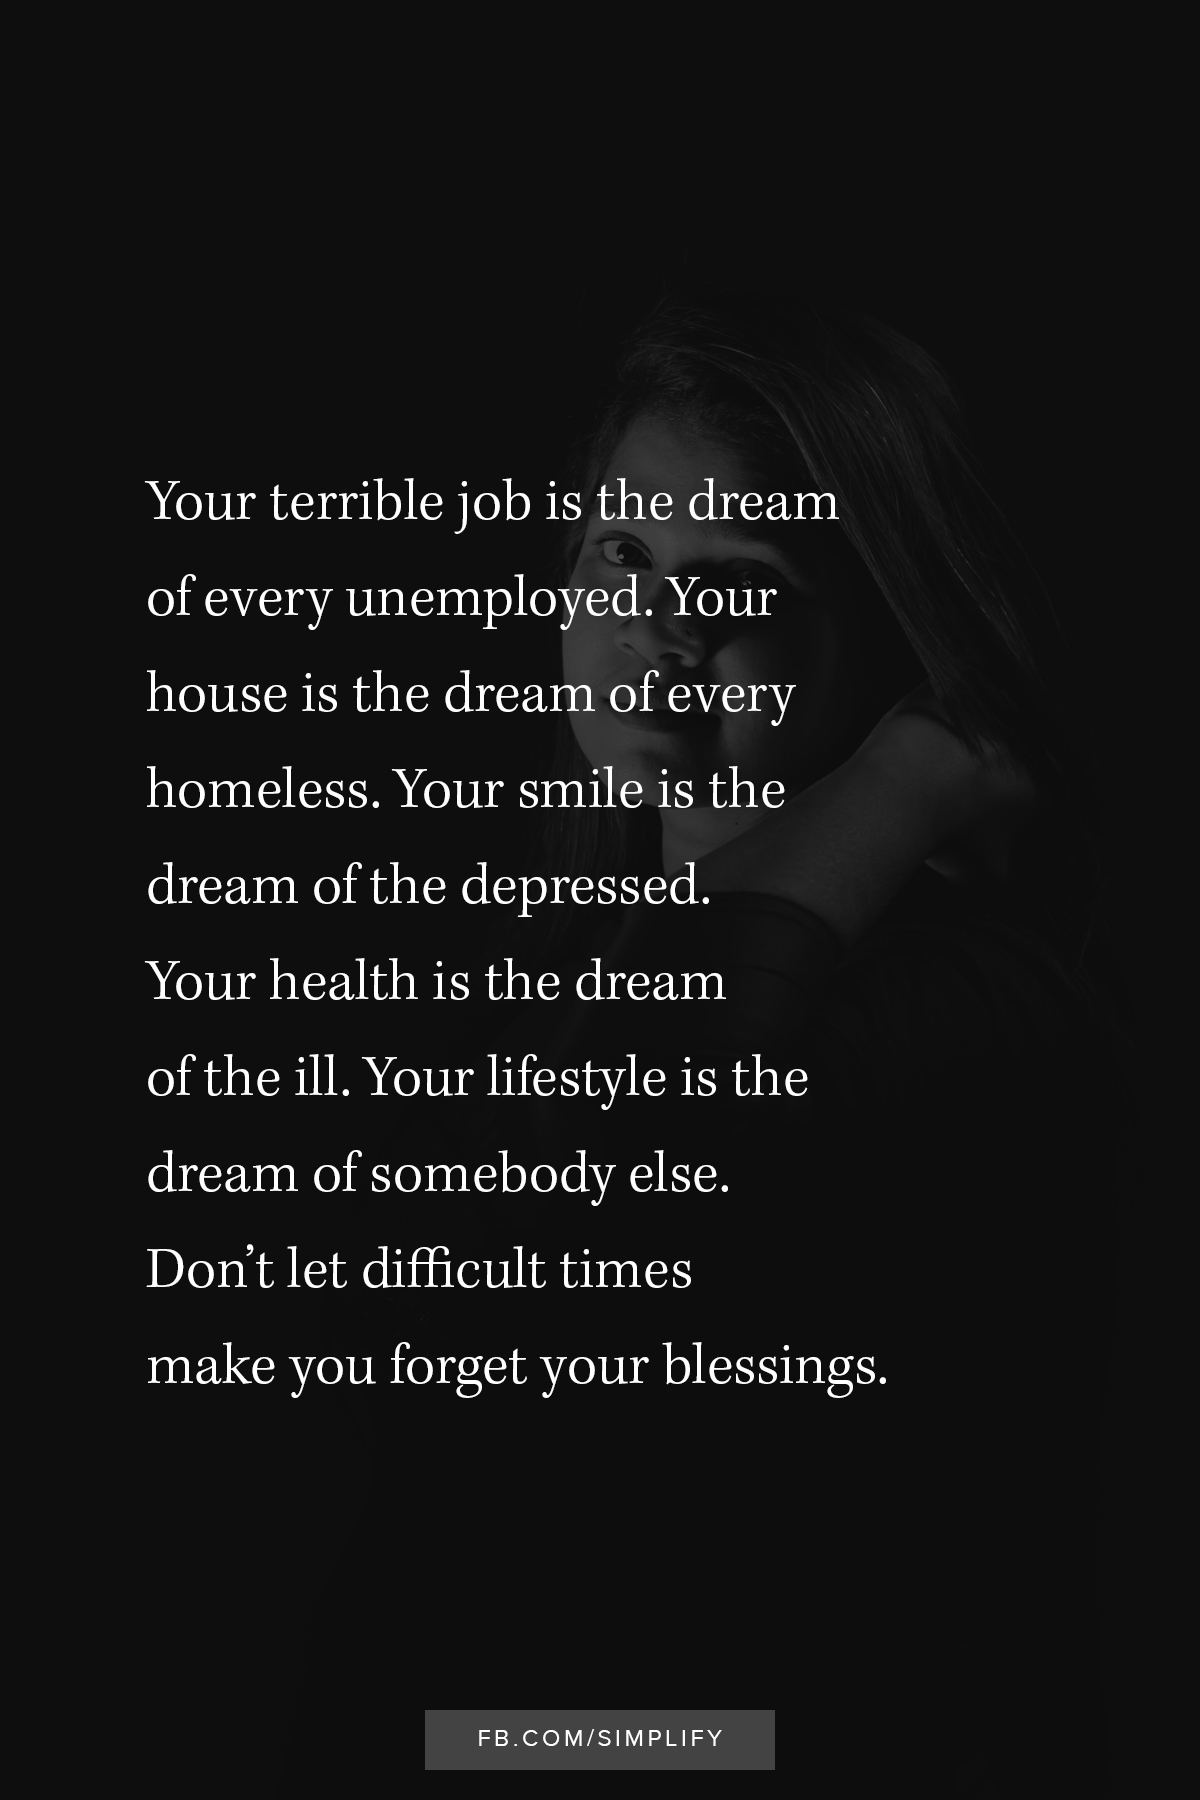 don't let difficult times make you forget your blessings, your terrible job in the dream of every unemployed, your house is the dream of every homeless, your smile is the dream of the depressed, your health is the dream of the ill